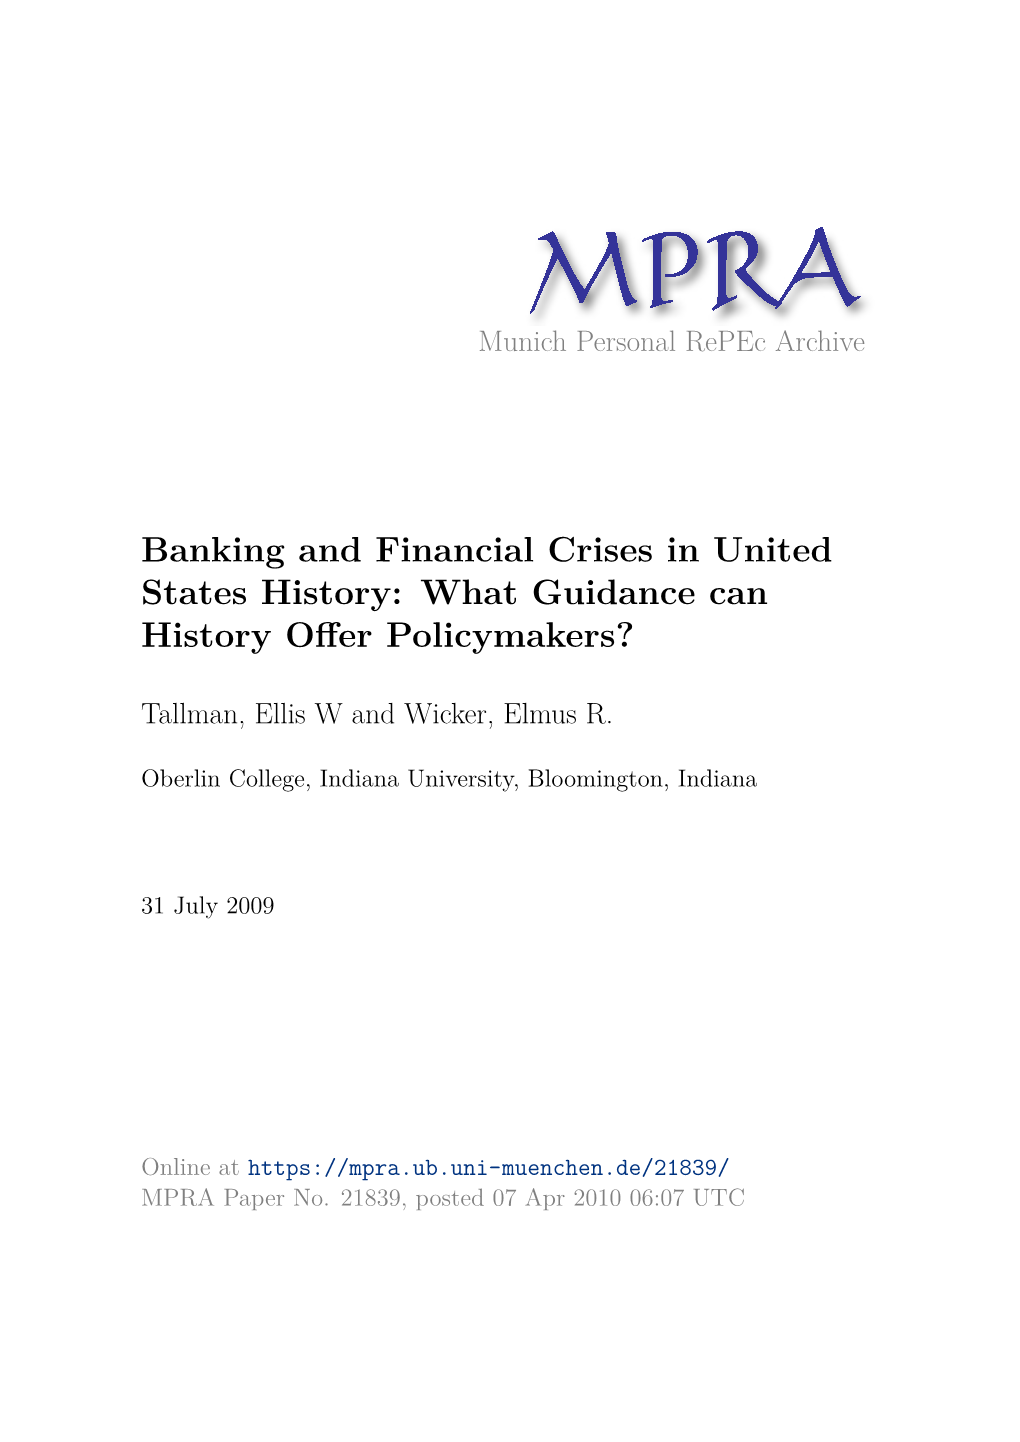 Banking and Financial Crises in United States History: What Guidance Can History Oﬀer Policymakers?